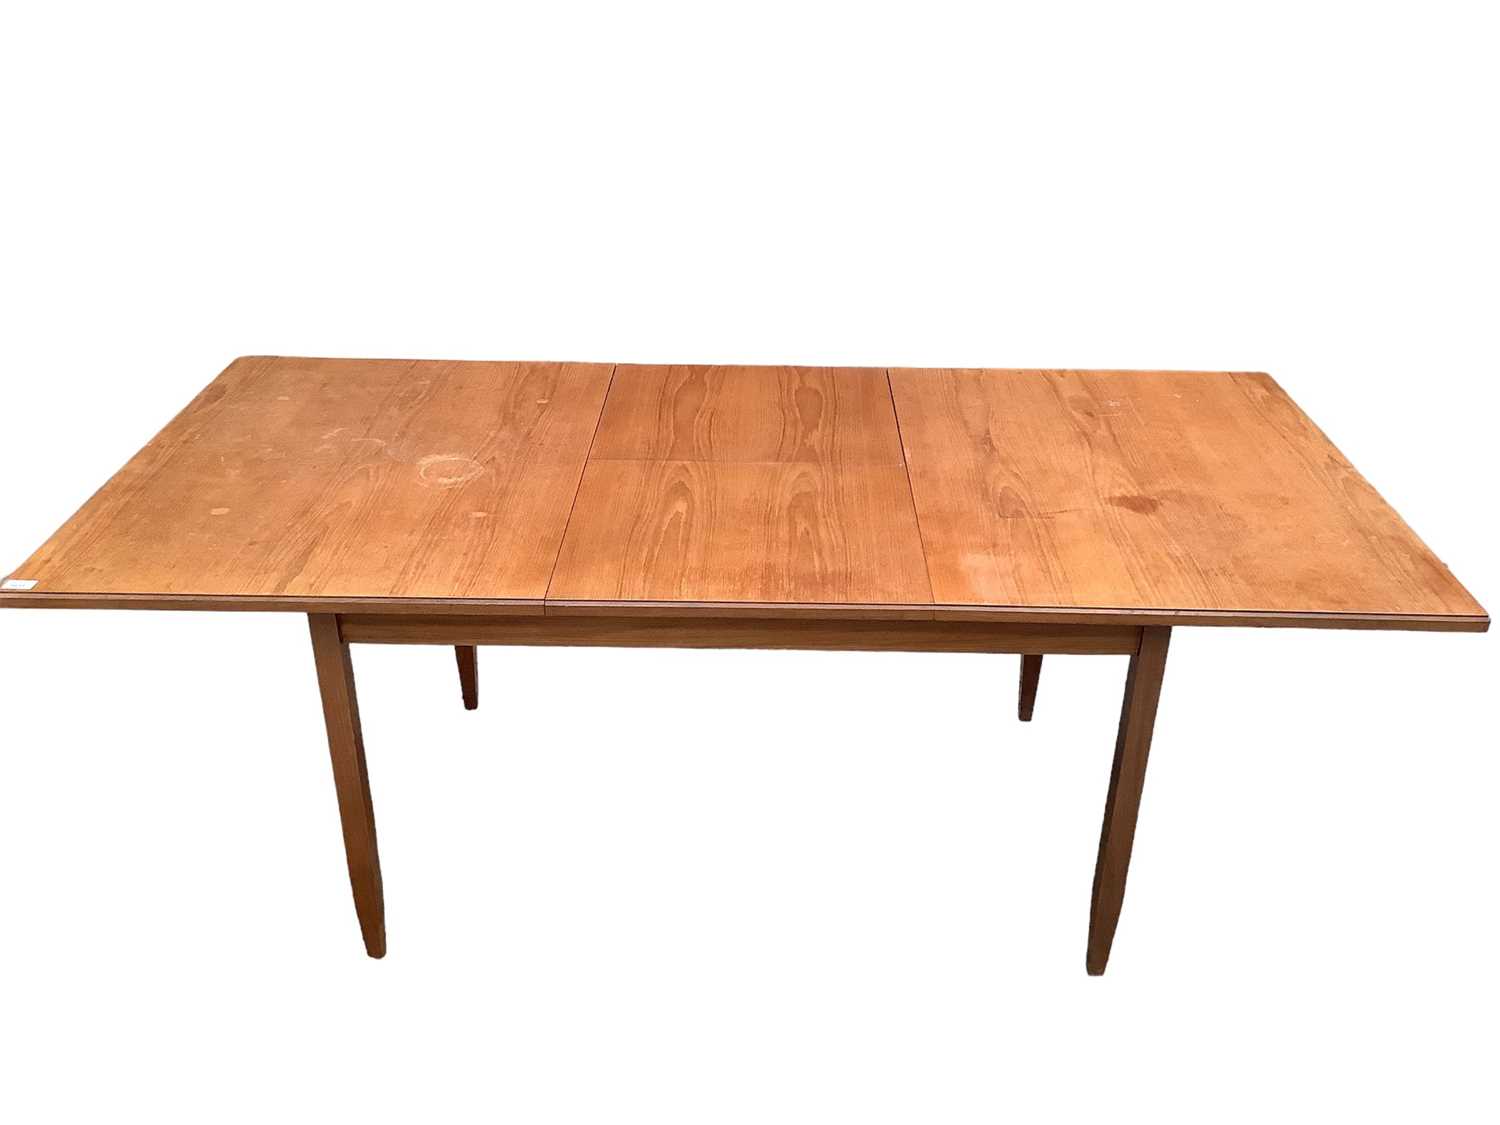 1960s teak table and set of four chairs by Windsor and Newton - Image 3 of 10